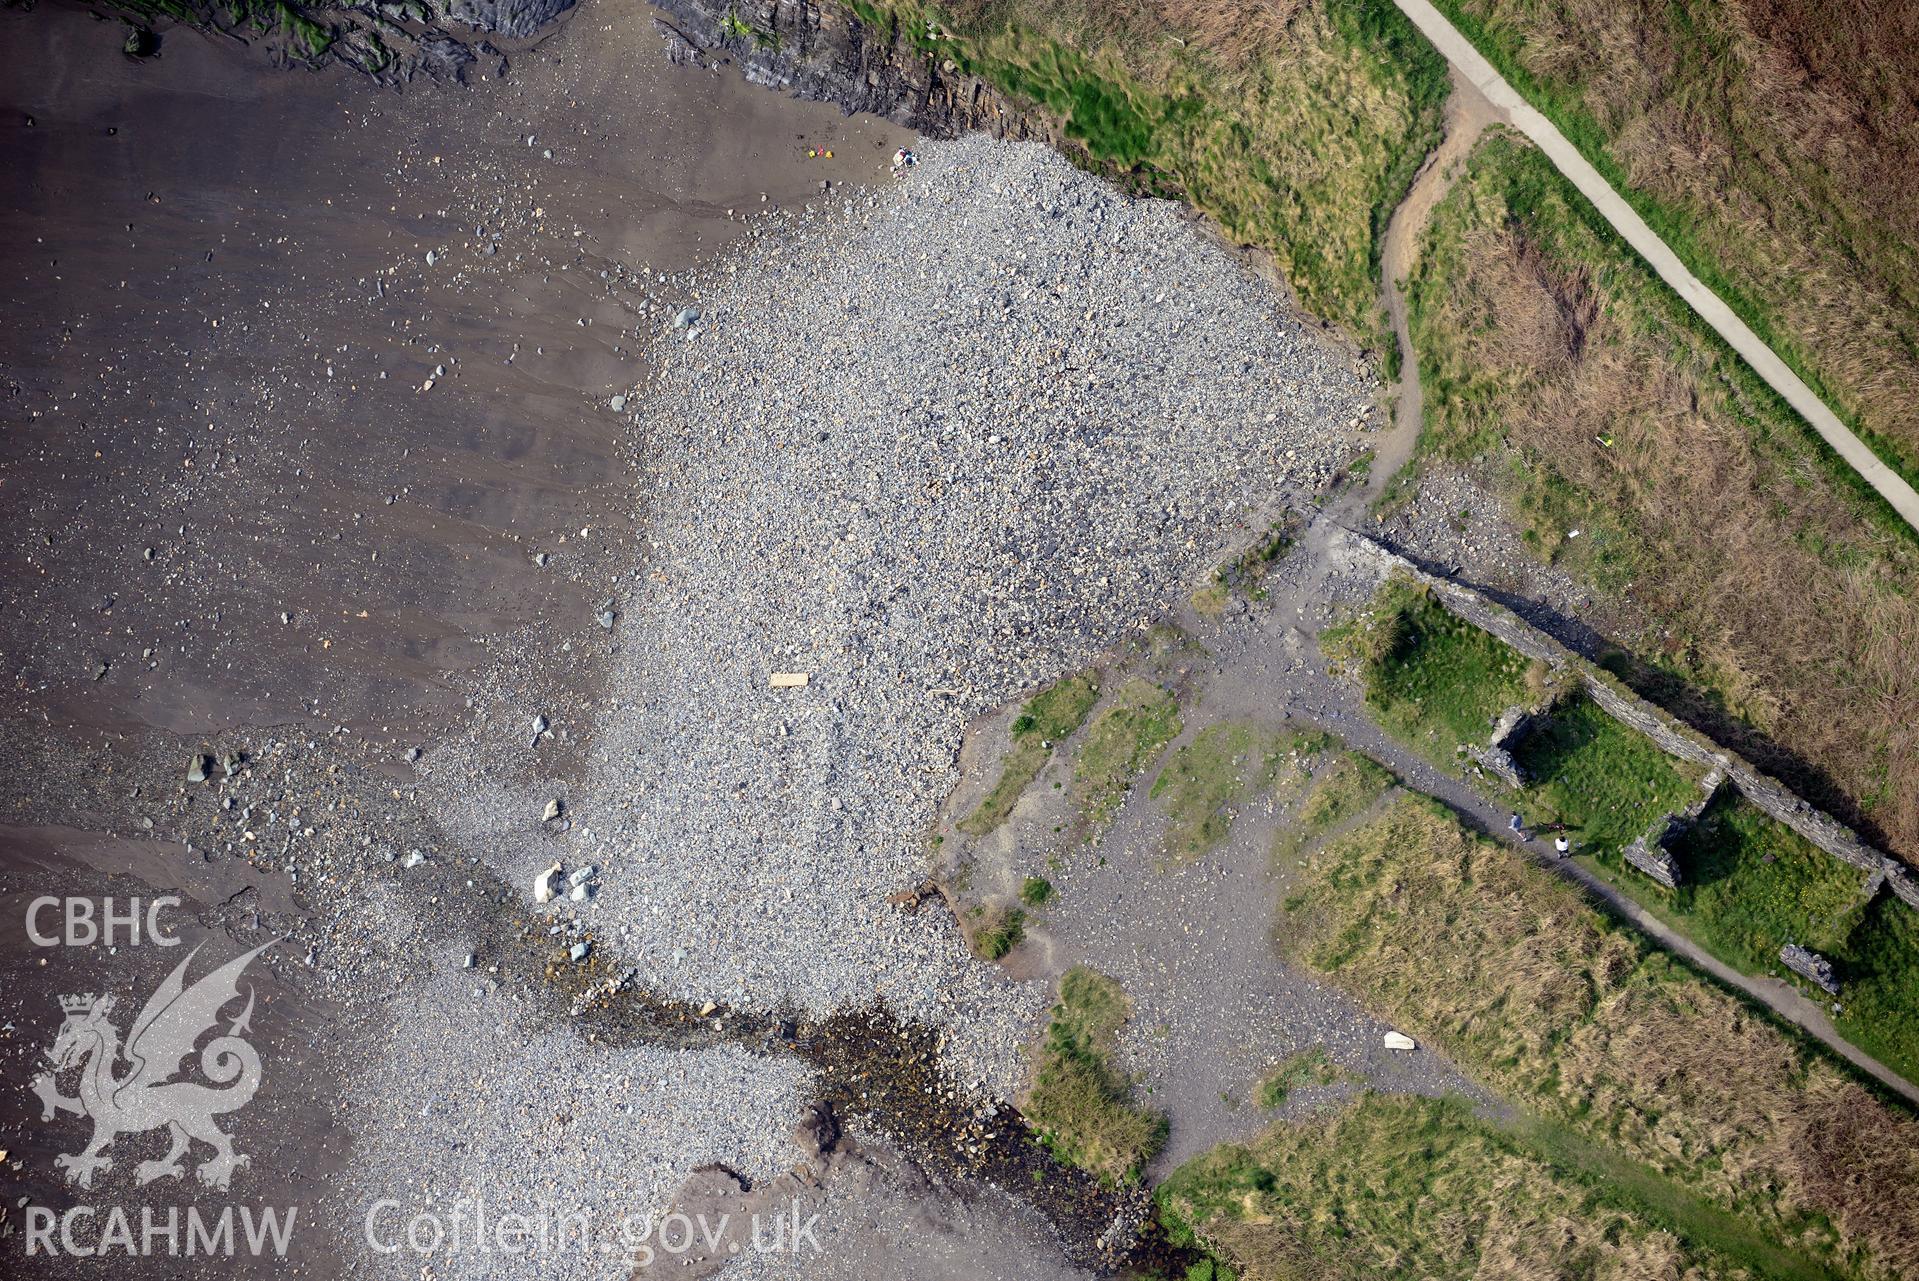 Royal Commission aerial photograph of Abereiddi/Abereiddy taken on 27th March 2017. Baseline aerial reconnaissance survey for the CHERISH Project. ? Crown: CHERISH PROJECT 2017. Produced with EU funds through the Ireland Wales Co-operation Programme 2014-2020. All material made freely available through the Open Government Licence.